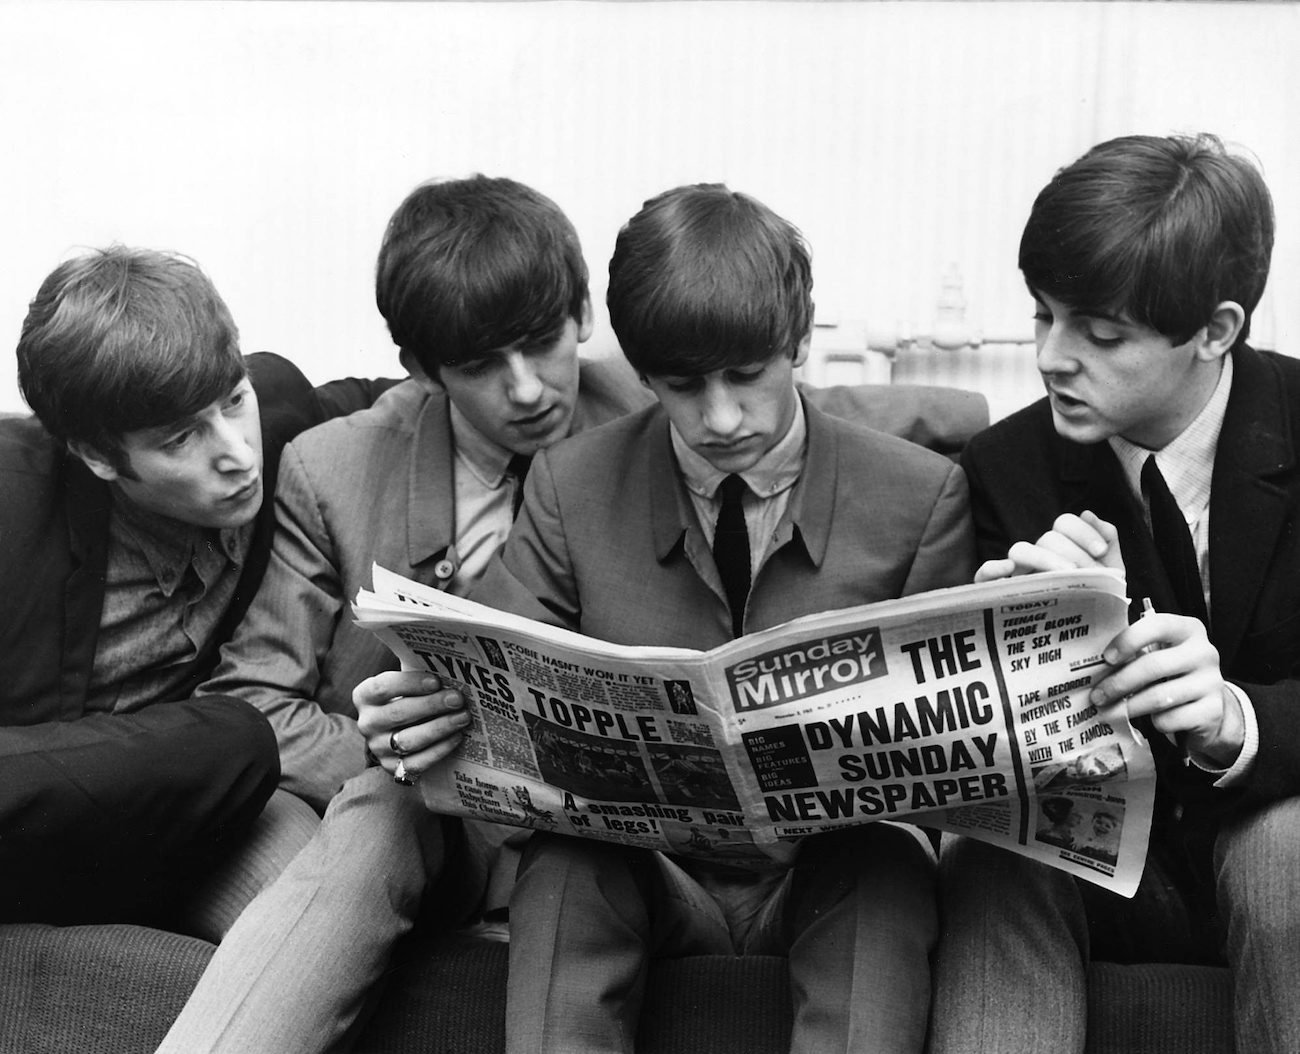 The Beatles reading the newspaper in suits in 1963.